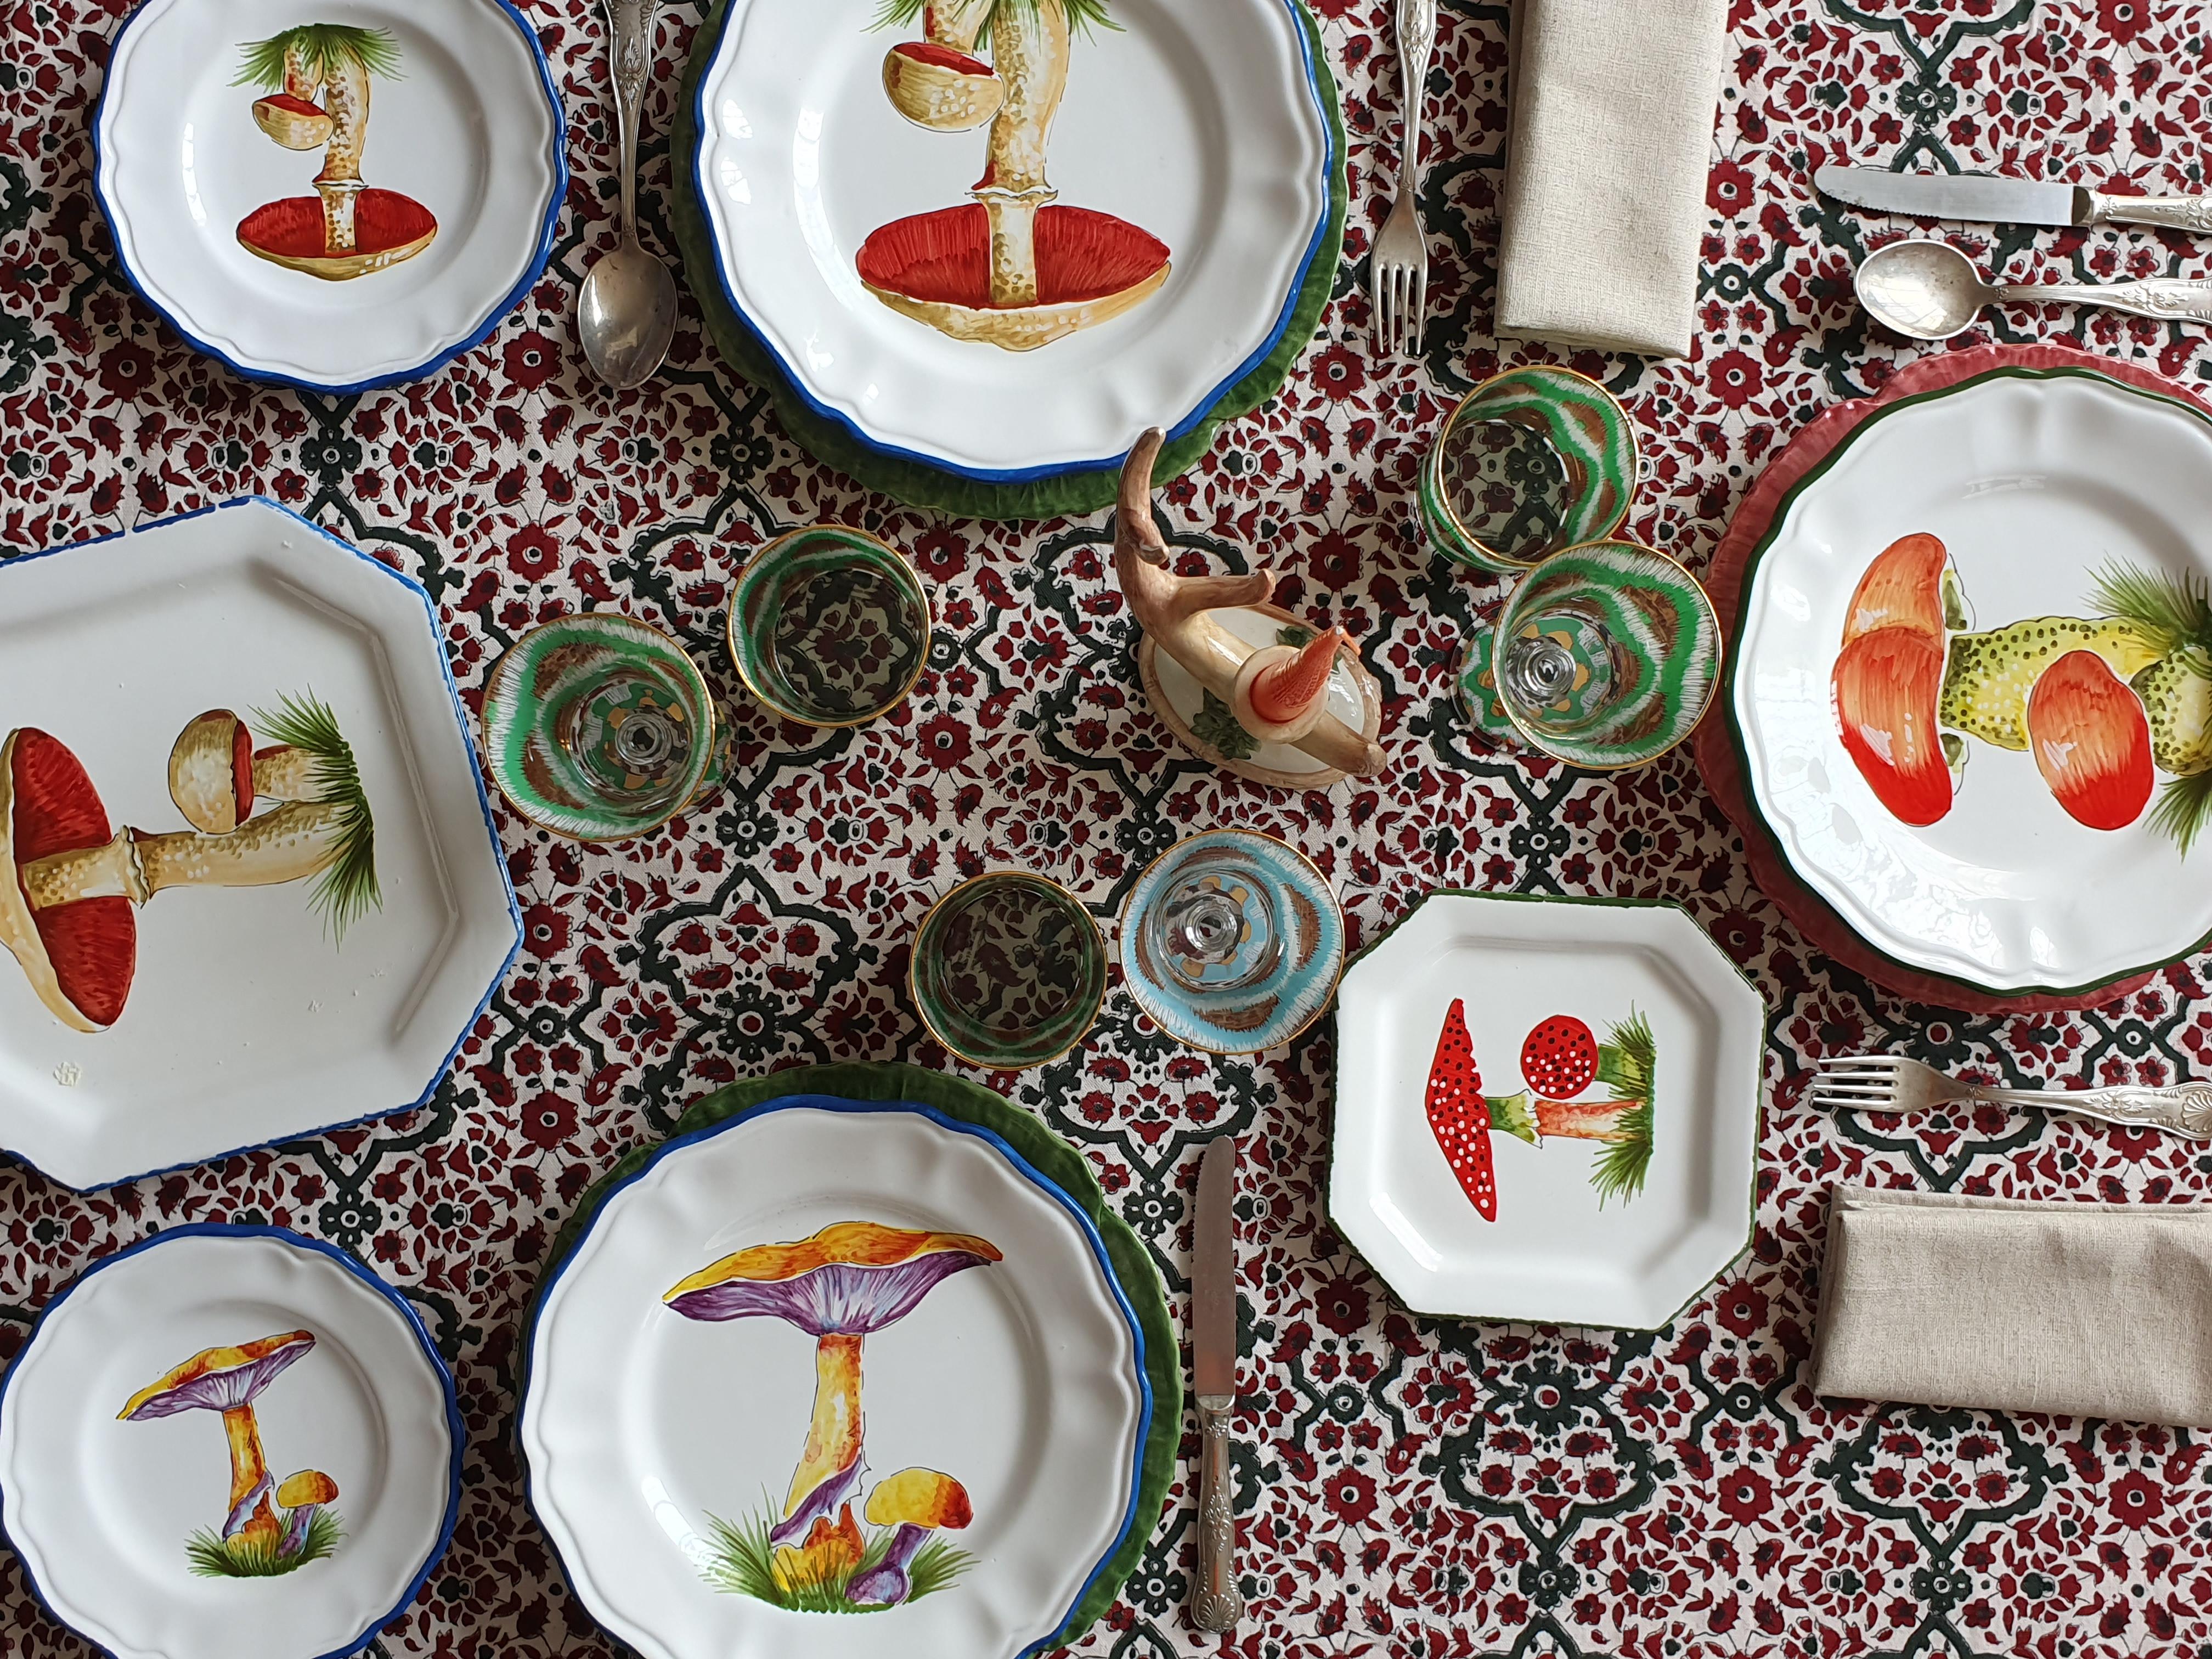 Italian craftsmanship meets Les-Ottomans in this beautifiul mushroom collection of handpainted plates
The charme of the woods on your table in a unique and special collection created by Bertrando Di Renzo and crafted by italian artisans.